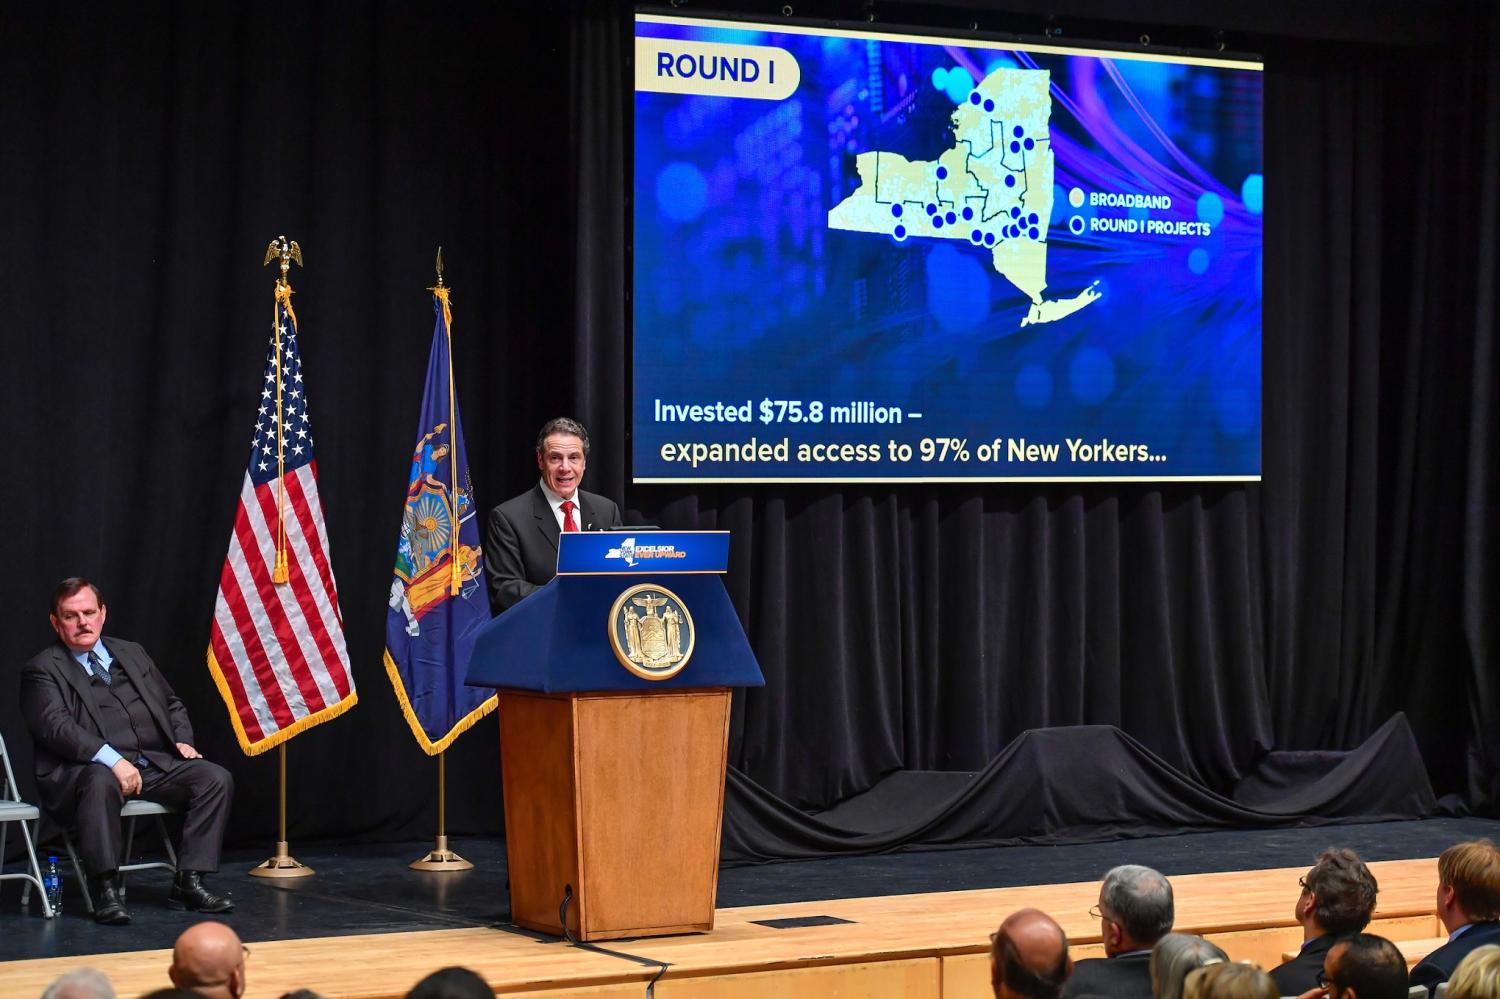 Governor Cuomo Announces Round III of Nation-Leading New NY Broadband Program to Bring High-Speed Internet Access to New Yorkers